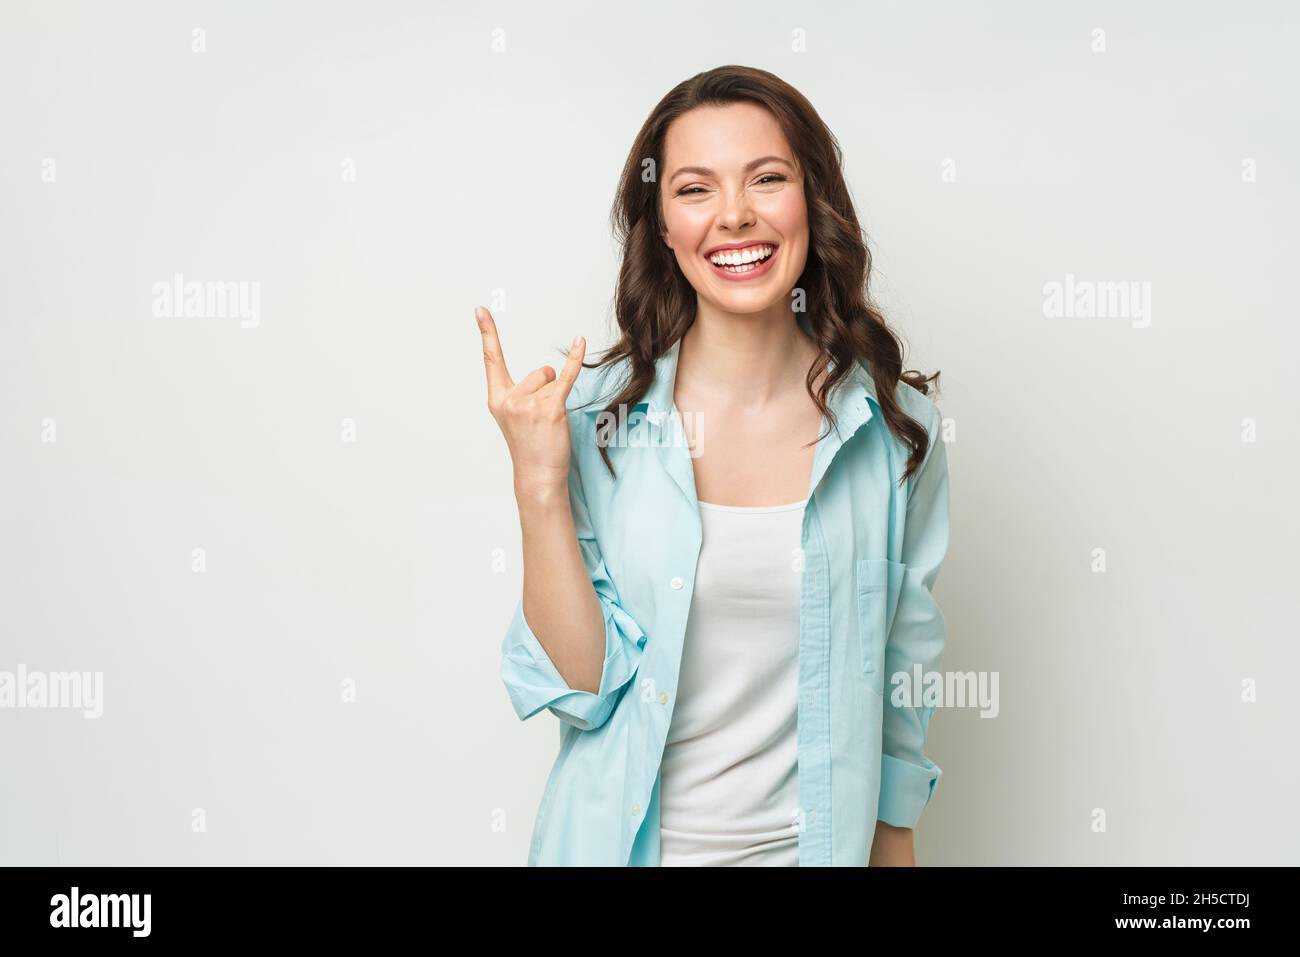 Emotive brunette woman make rock n roll sign, , yells loudly, stands over white background with empty space, feels self confident. Stock Photo